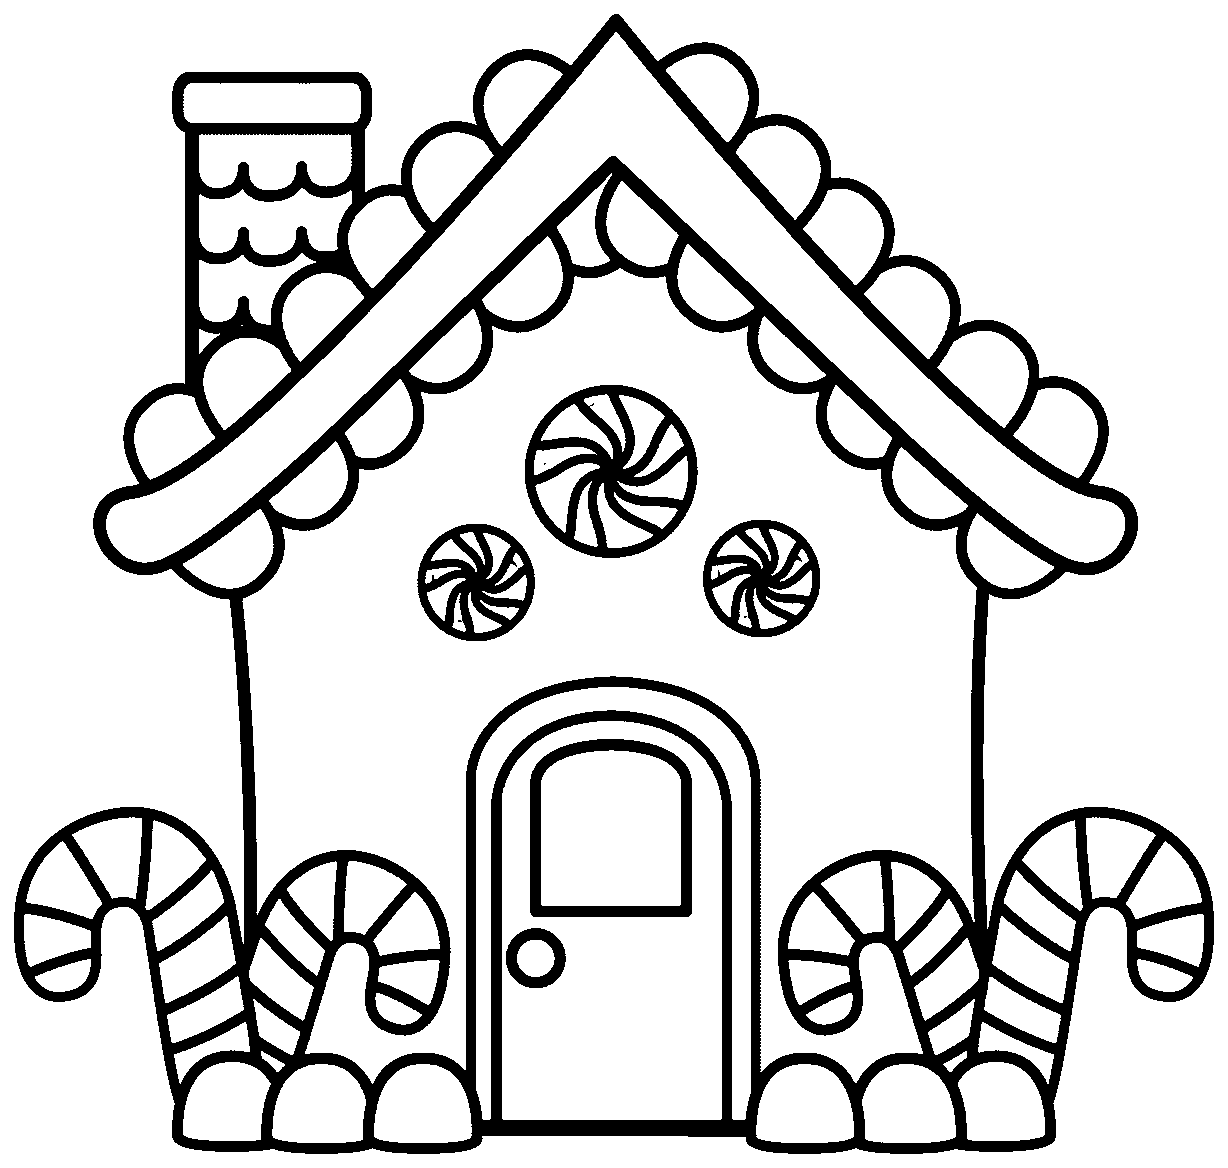 Printable Gingerbread House Coloring Pages | Printable christmas coloring  pages, Free christmas coloring pages, Christmas coloring sheets